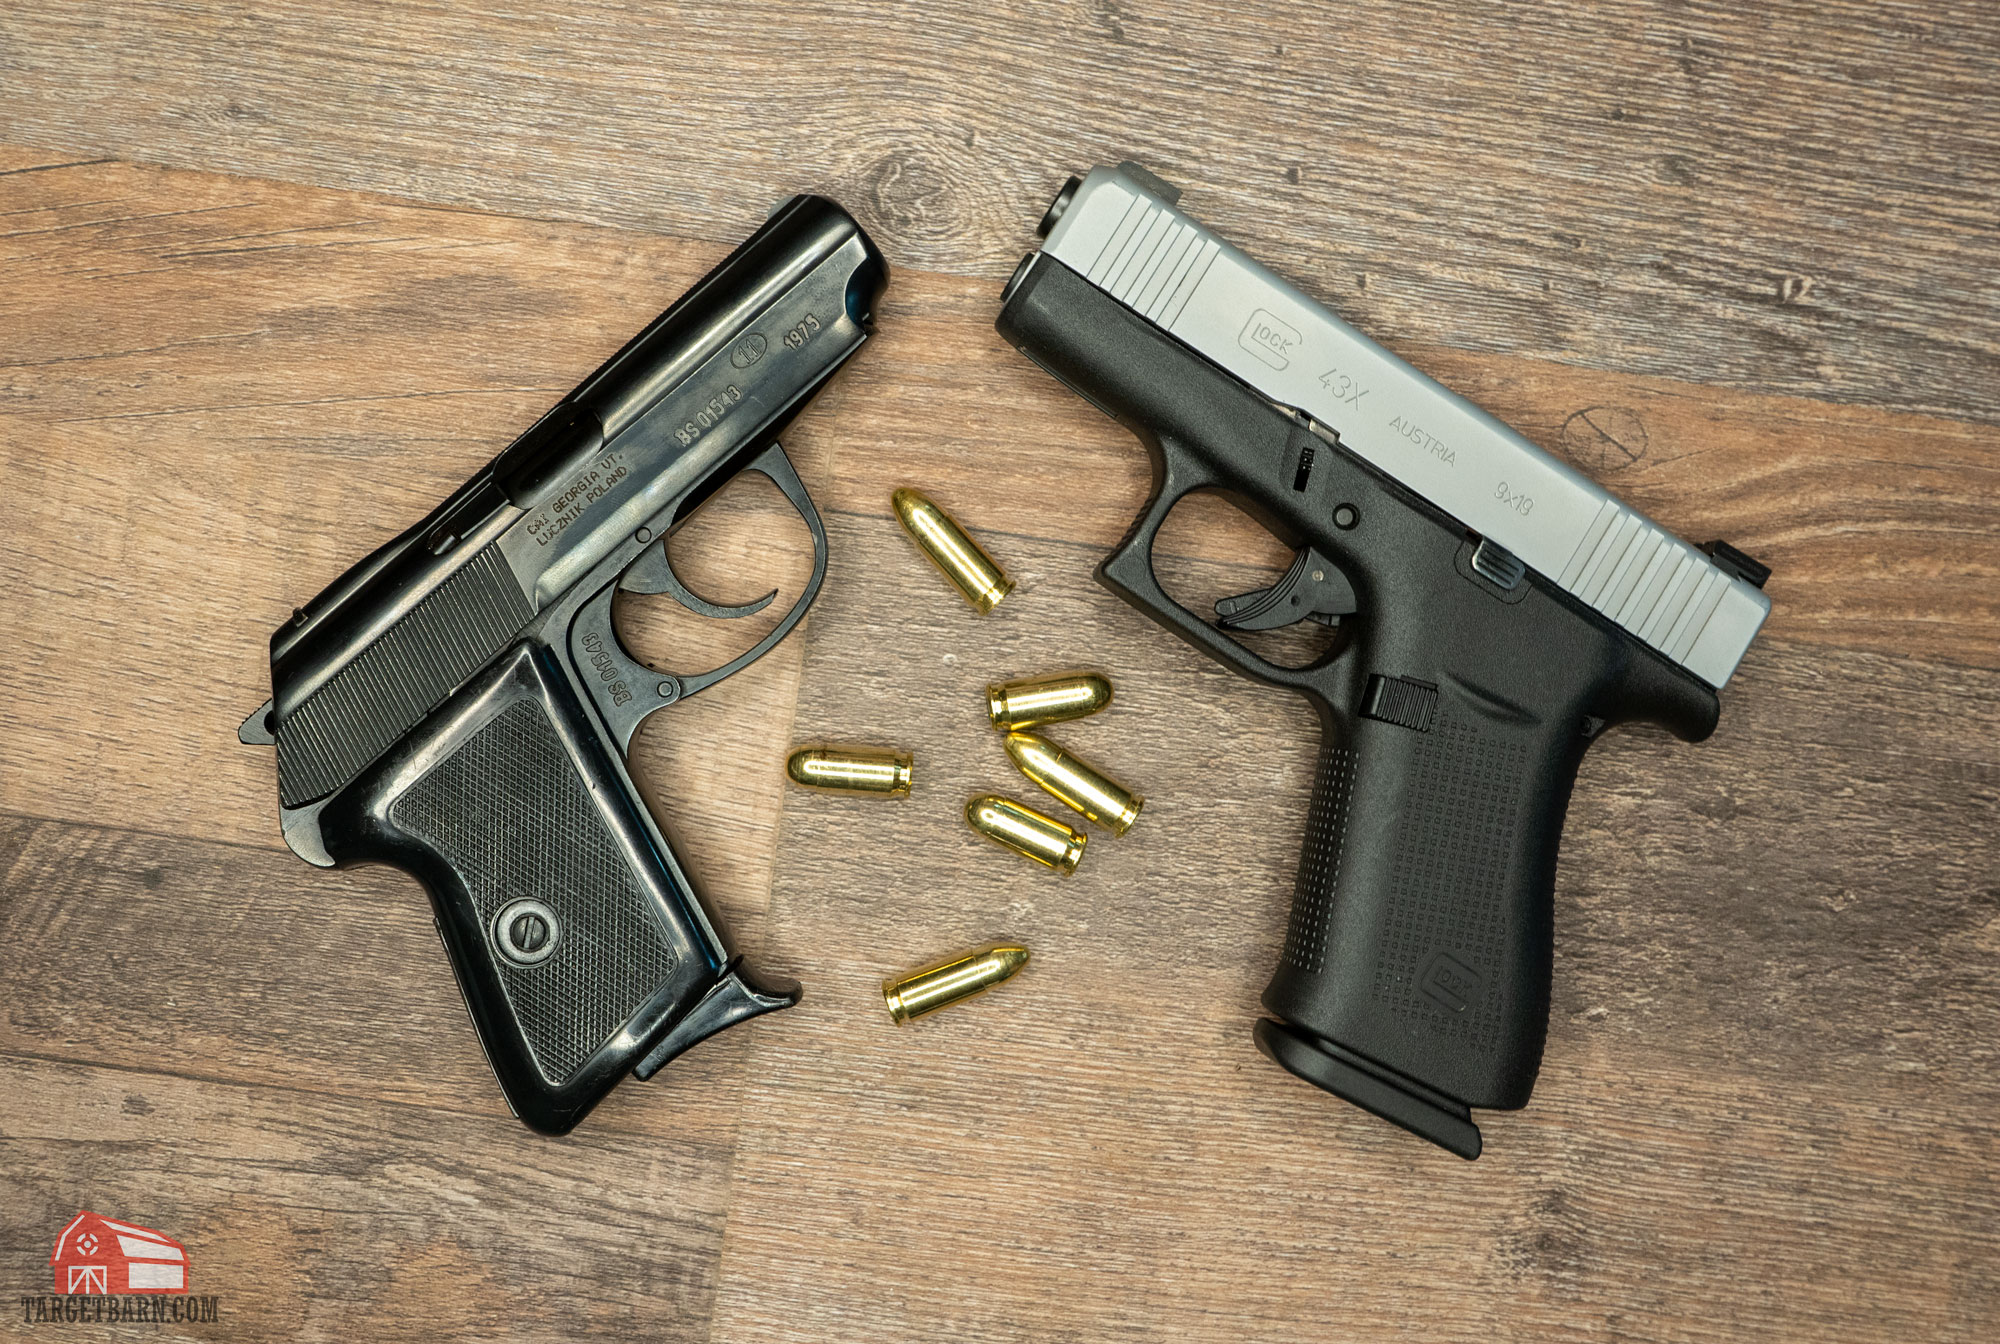 a 9x18mm makarov and 9x19mm luger pistol and rounds